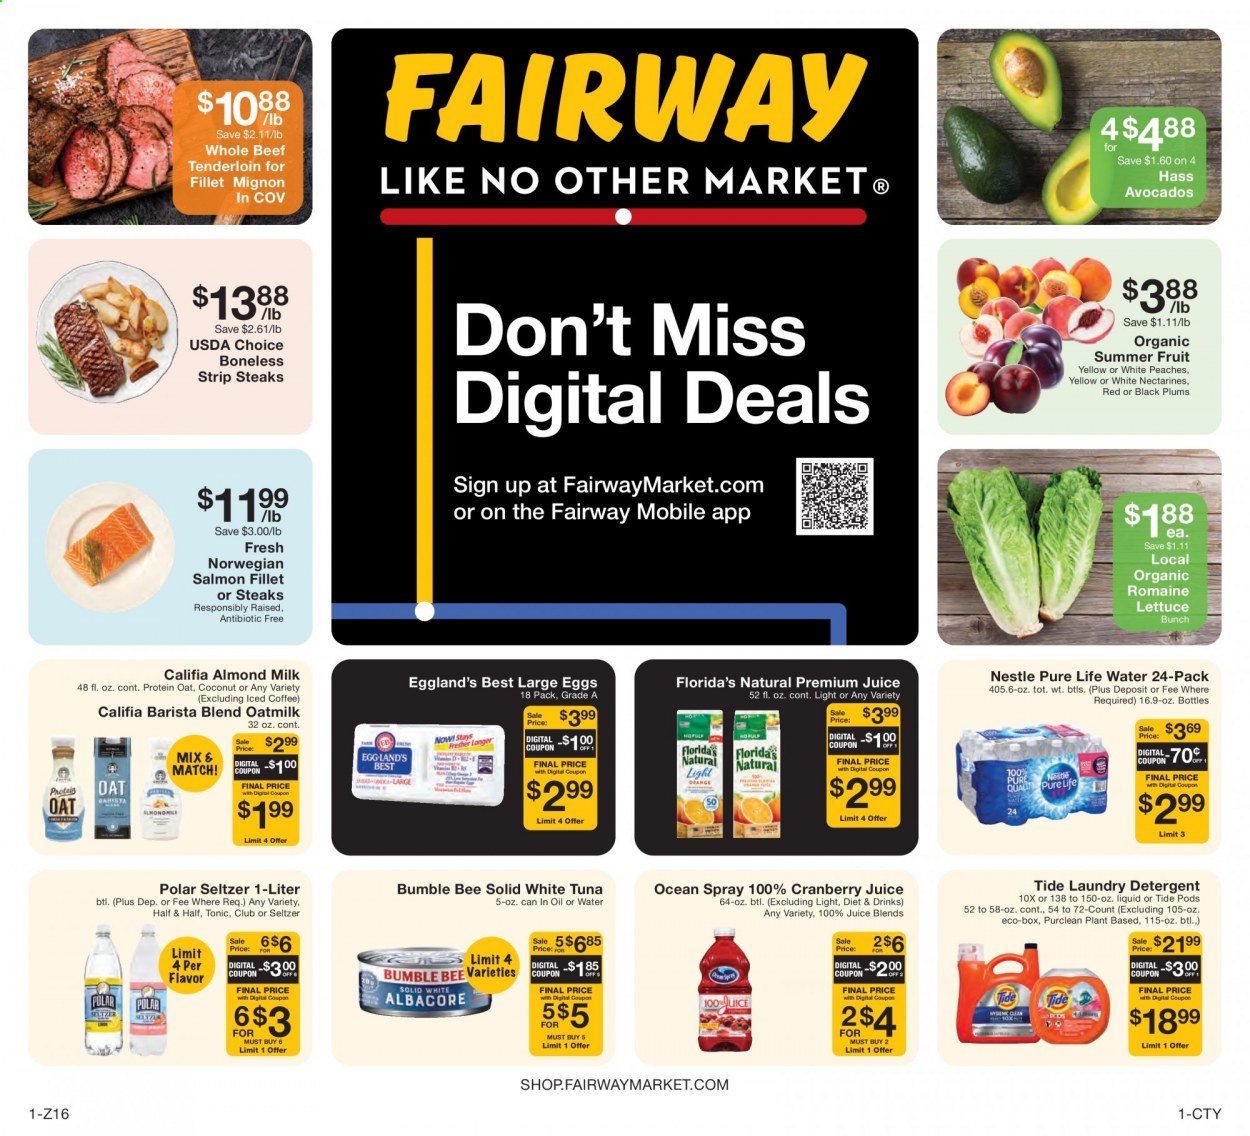 thumbnail - Fairway Market Flyer - 07/09/2021 - 07/15/2021 - Sales products - plums, summer fruit, lettuce, avocado, coconut, salmon, salmon fillet, tuna, Bumble Bee, almond milk, oat milk, large eggs, Nestlé, Florida's Natural, oats, cranberry juice, juice, tonic, seltzer water, Pure Life Water, iced coffee, beef meat, steak, beef tenderloin, striploin steak, nectarines, Half and half, black plums, peaches. Page 1.